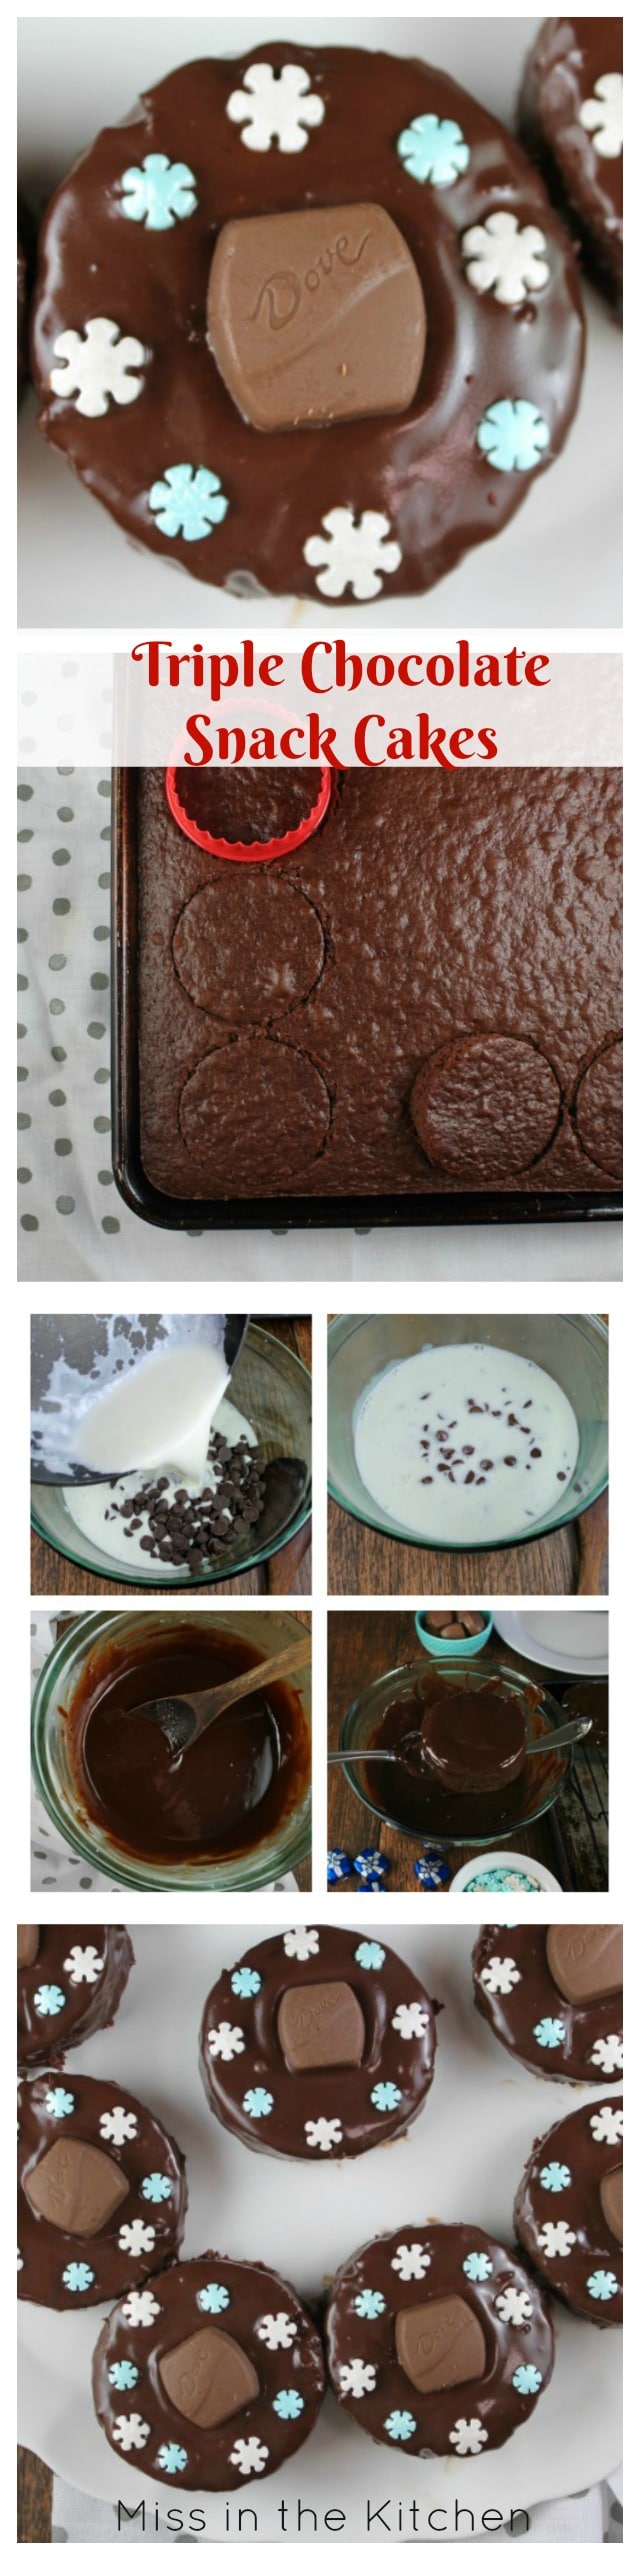 Triple Chocolate Snack Cakes Recipe perfect for holiday goodie baskets from MissintheKitchen.com #ad